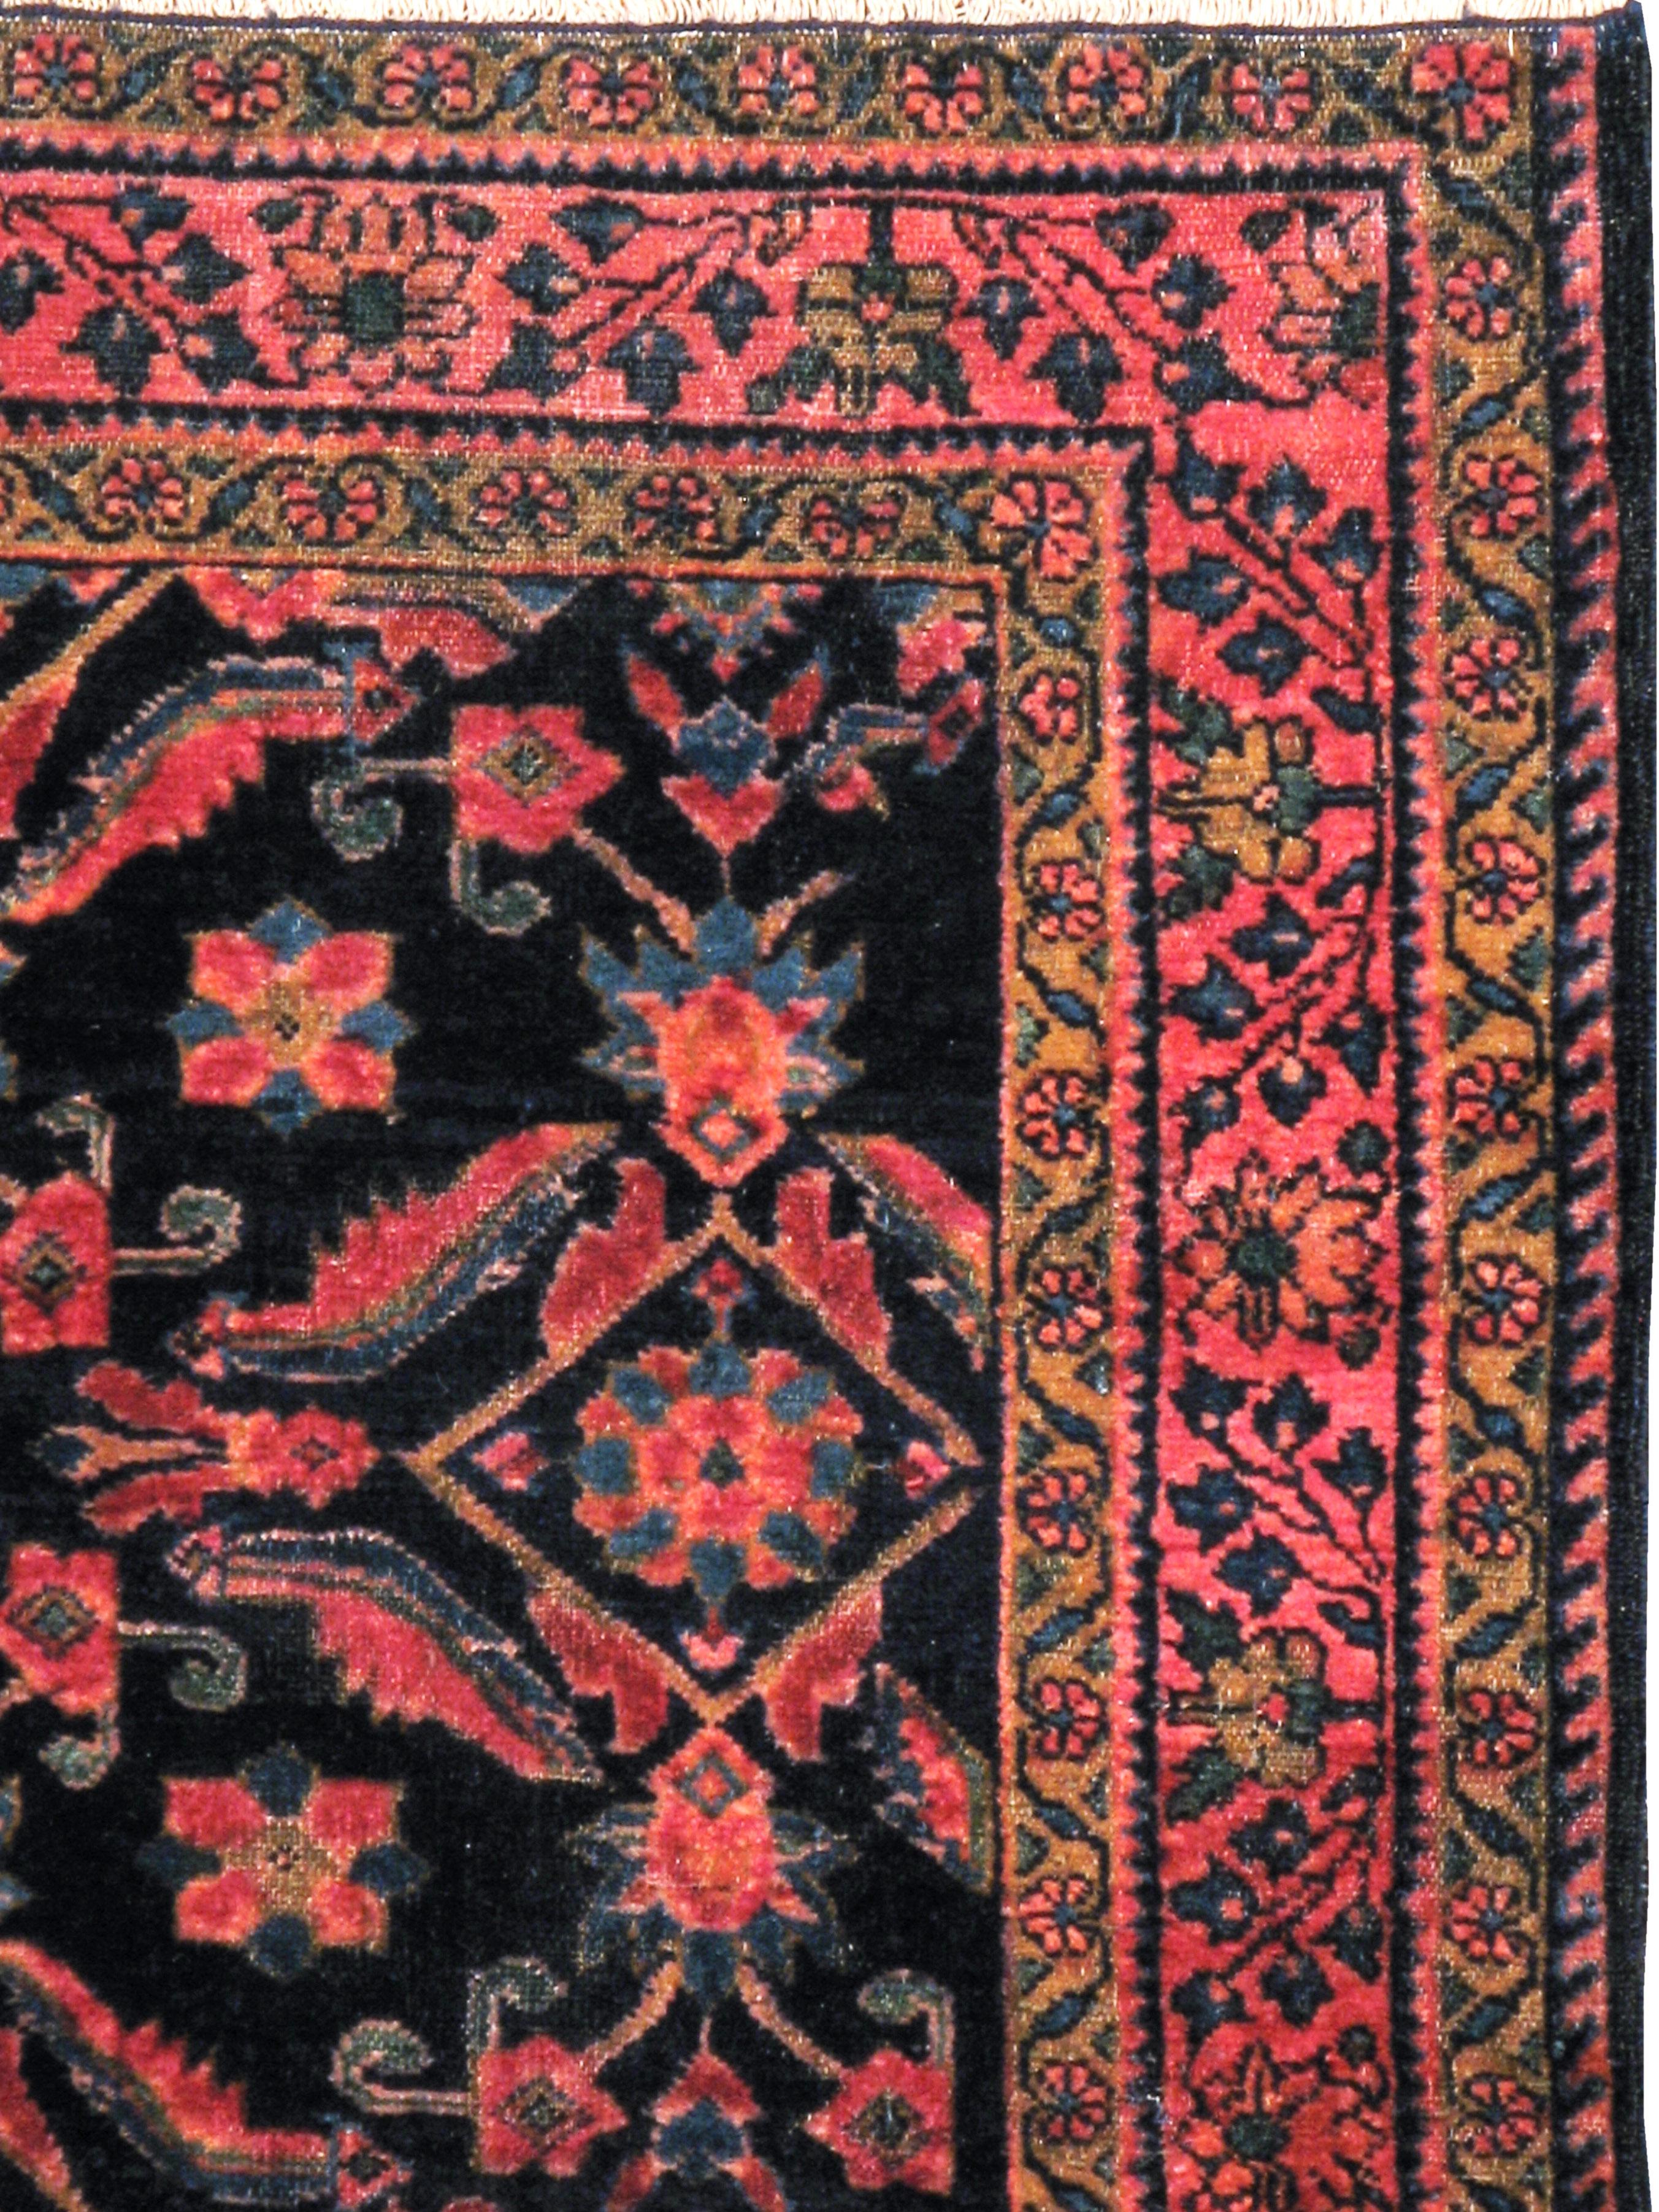 An antique Persian Lilihan rug from the early 20th century. This small squarish Hamadan area rug displays a large scale, spacious Herati design on a black and navy blue field somewhat reminiscent of the Turkish Oushak Yaprak design. The narrow rose